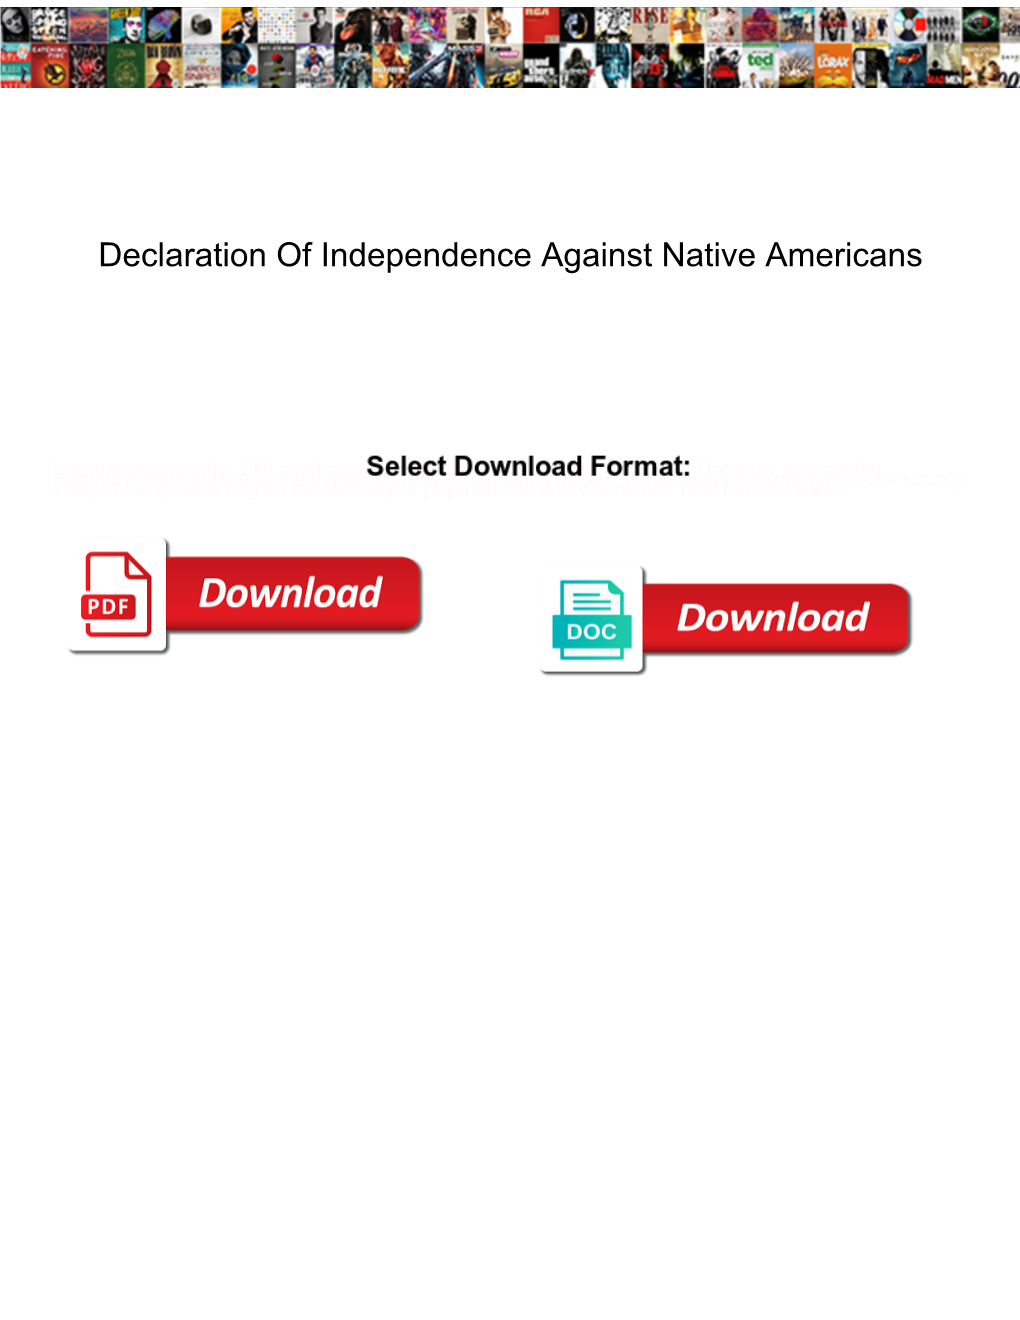 Declaration of Independence Against Native Americans